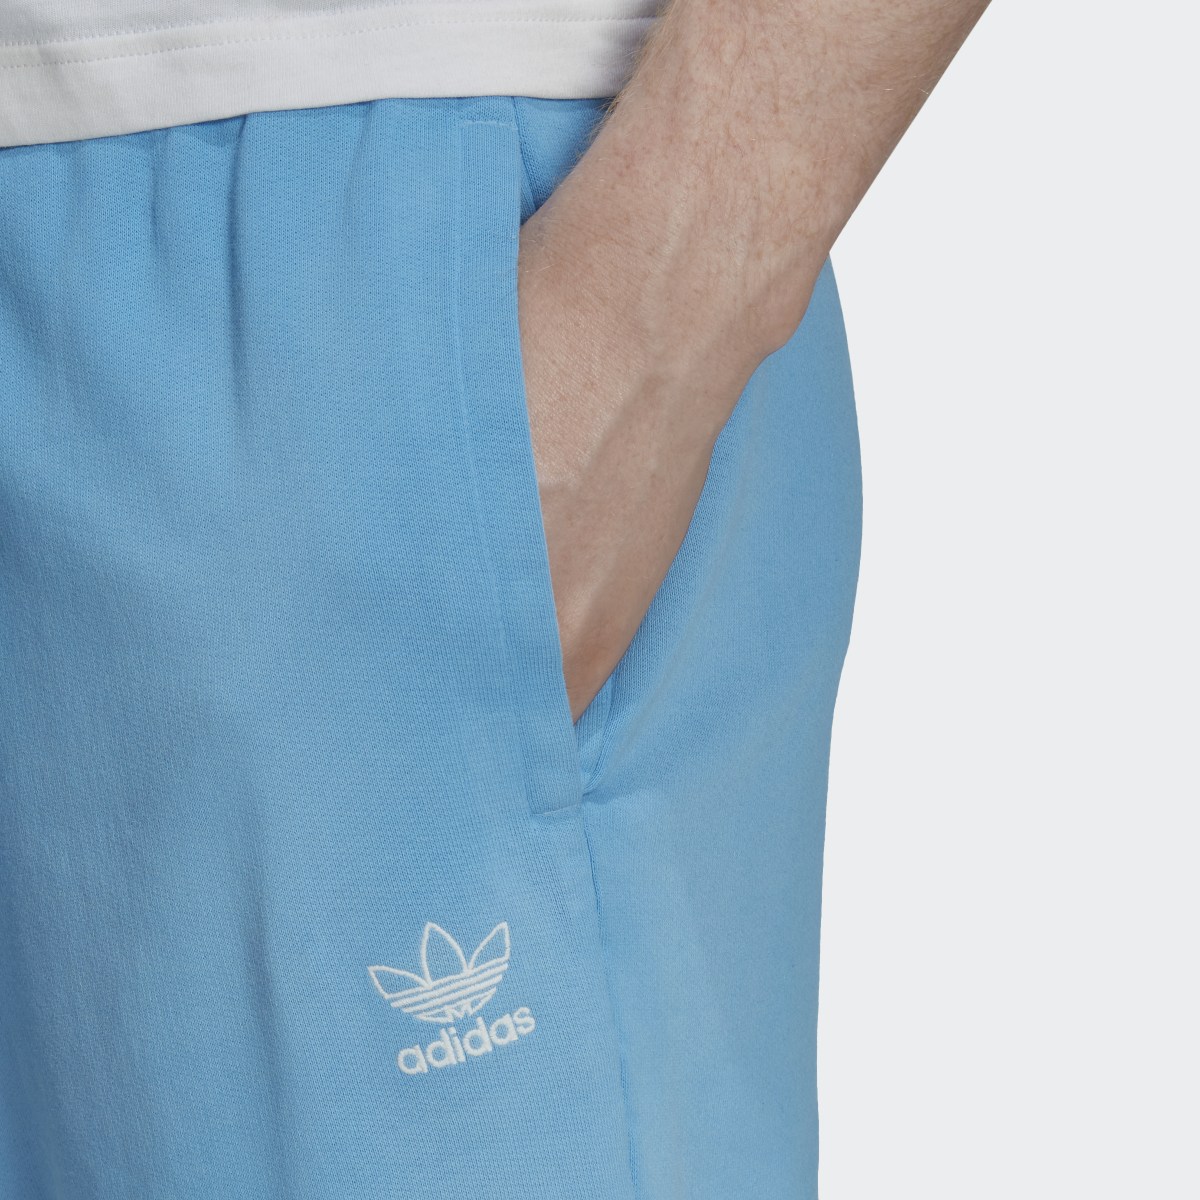 Adidas Essentials+ Made with Nature Shorts. 5